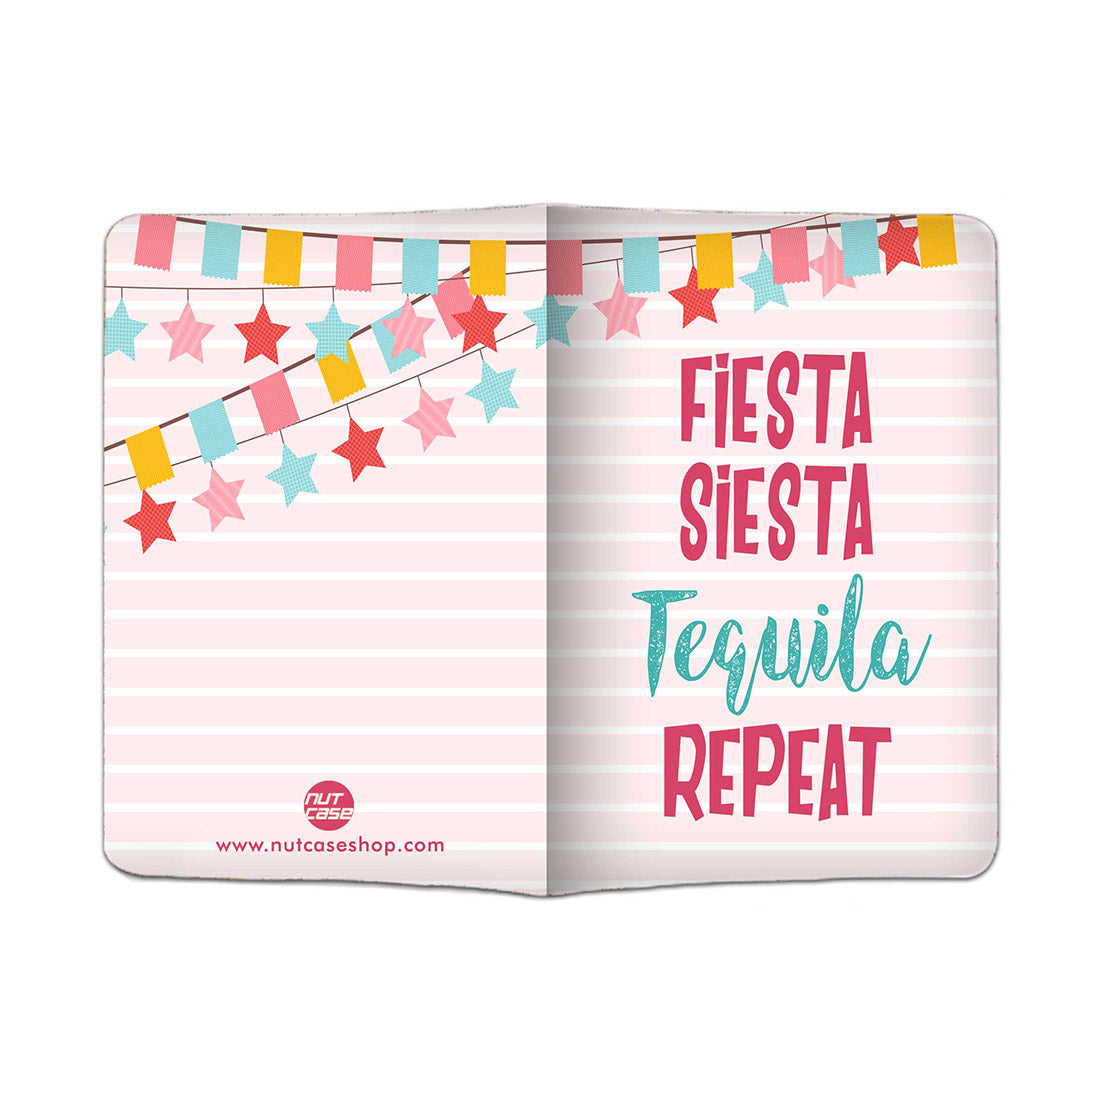 Passport Cover Holder Travel Case With Luggage Tag - Fiesta Siesta Nutcase